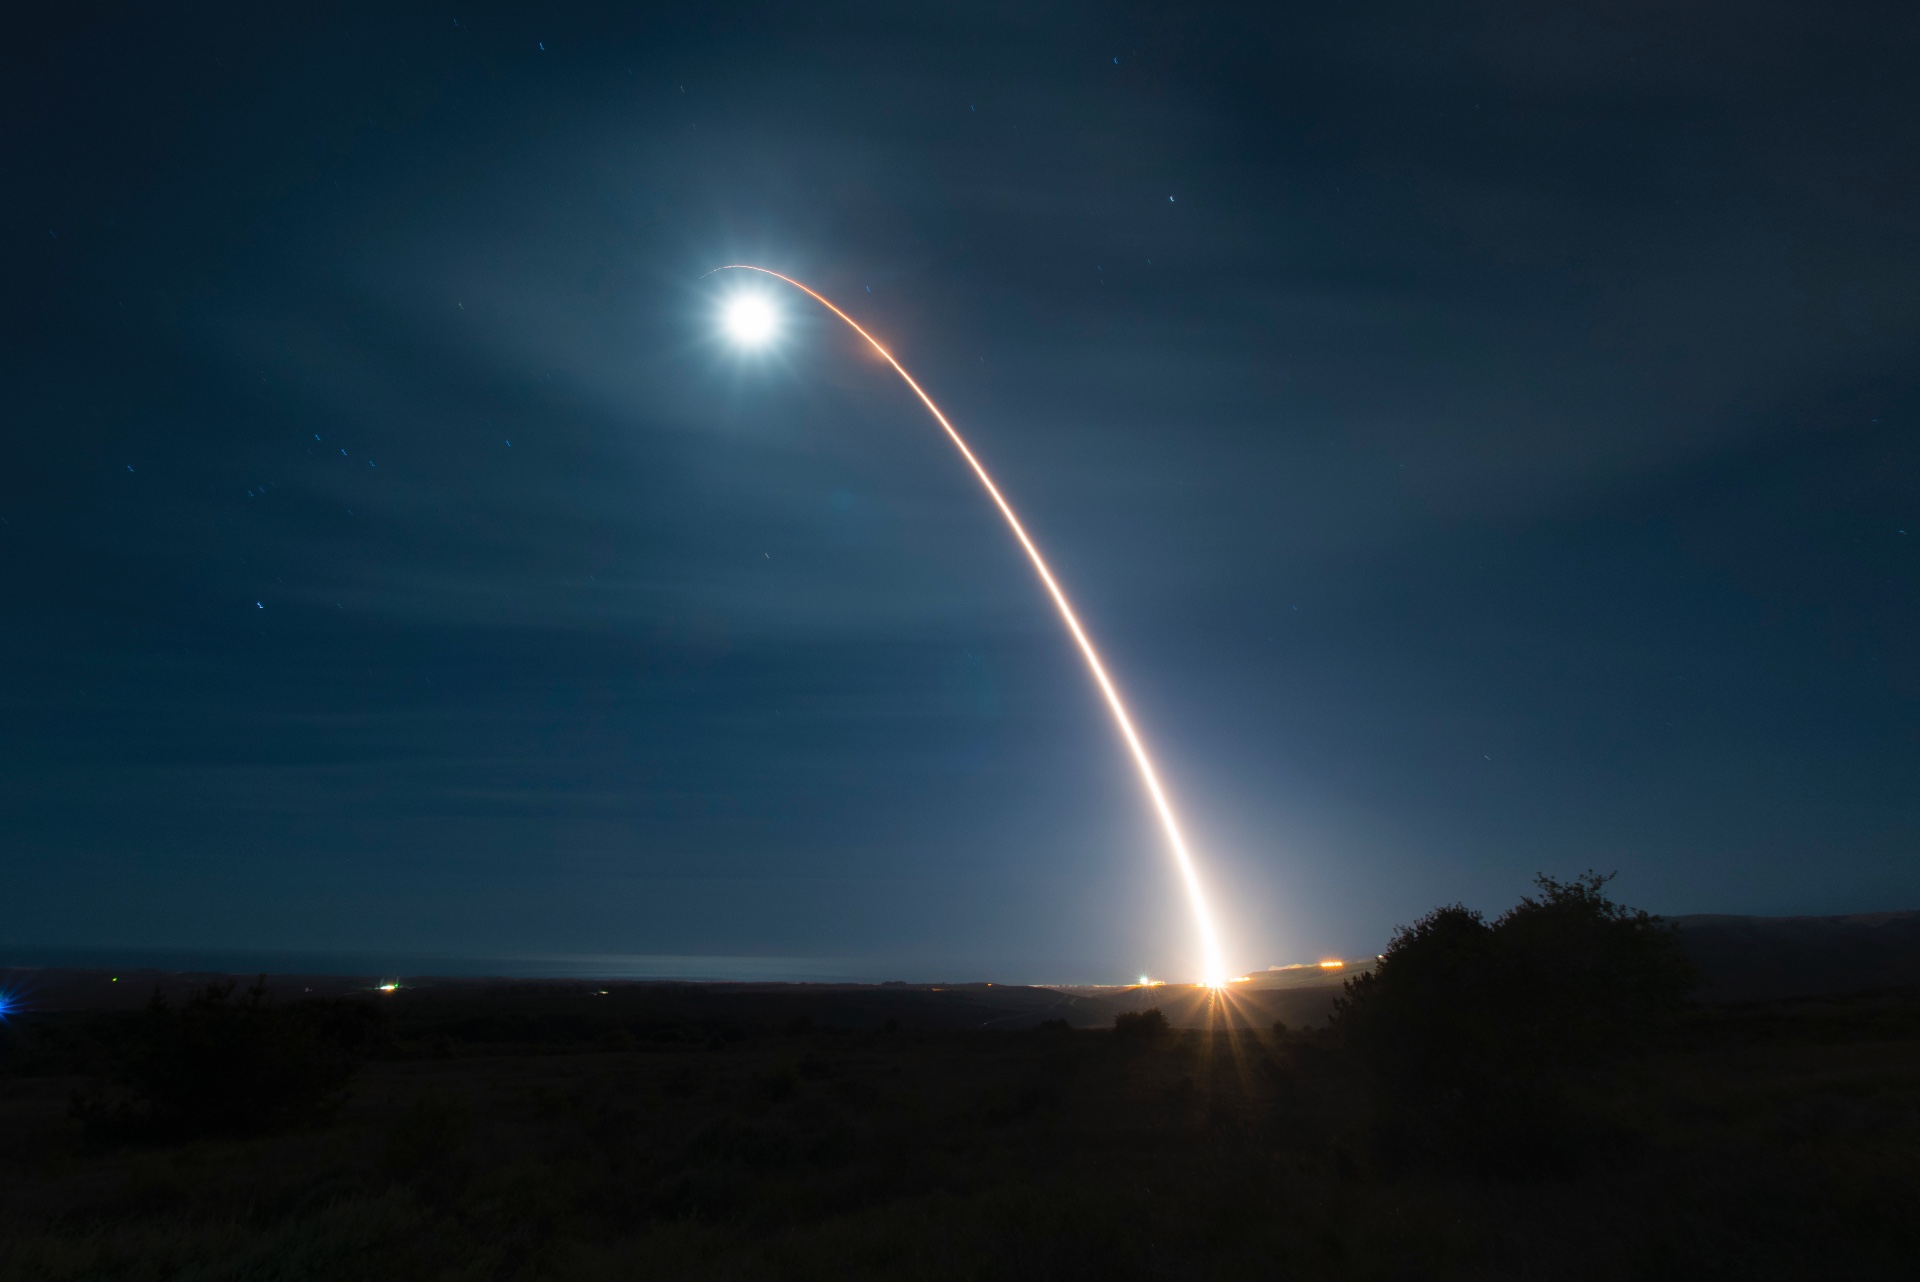 An unarmed Minuteman III intercontinental ballistic missile launches during a developmental test at 12:33 a.m. Pacific Time Wednesday, Feb. 5, 2020, at Vandenberg Air Force Base, Calif